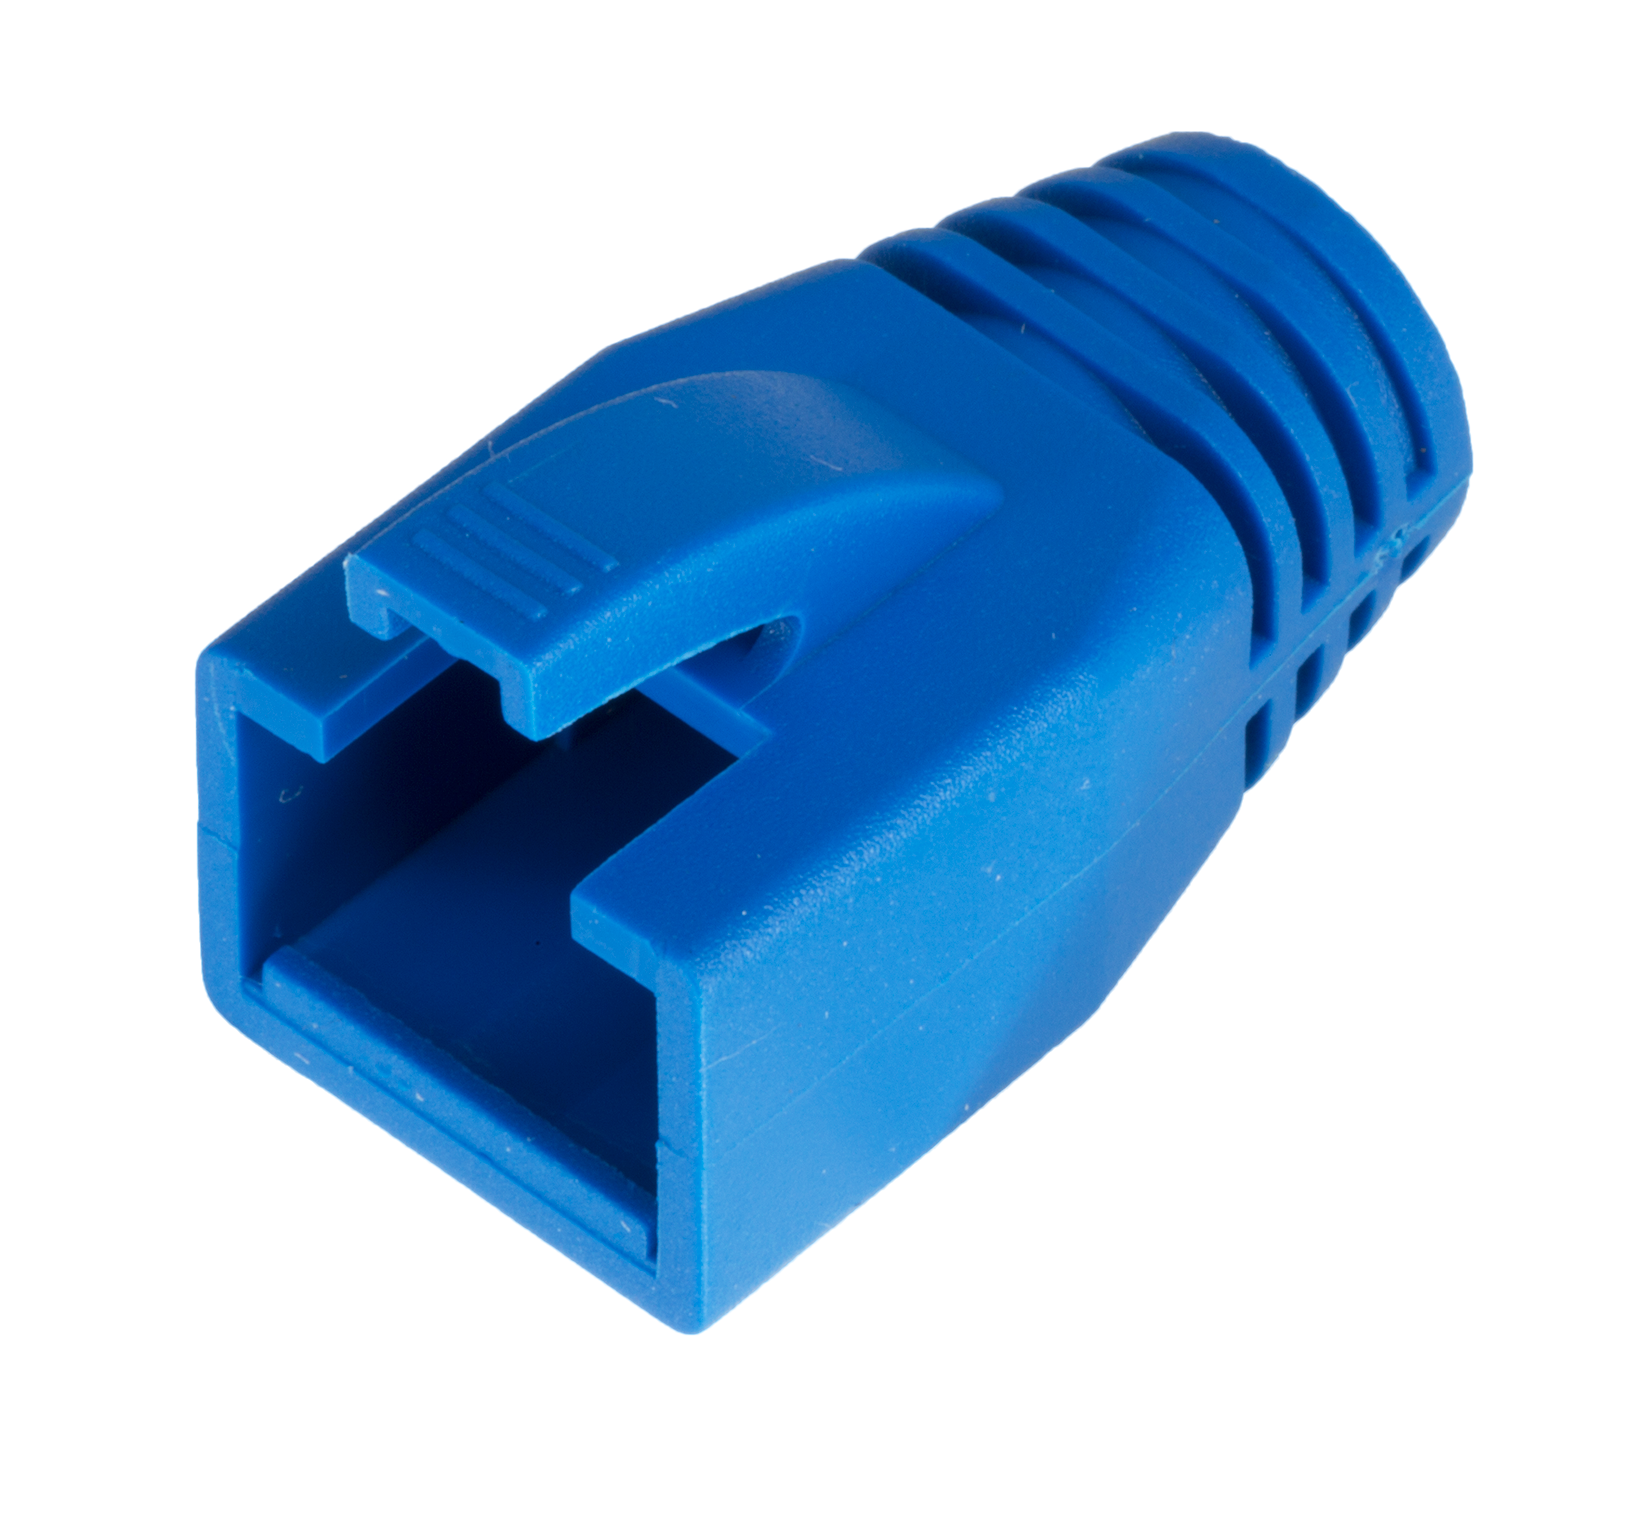 BNR Blue RJ45 Rubber Boot Cable Protector - 100 Pack - BNR Industrial